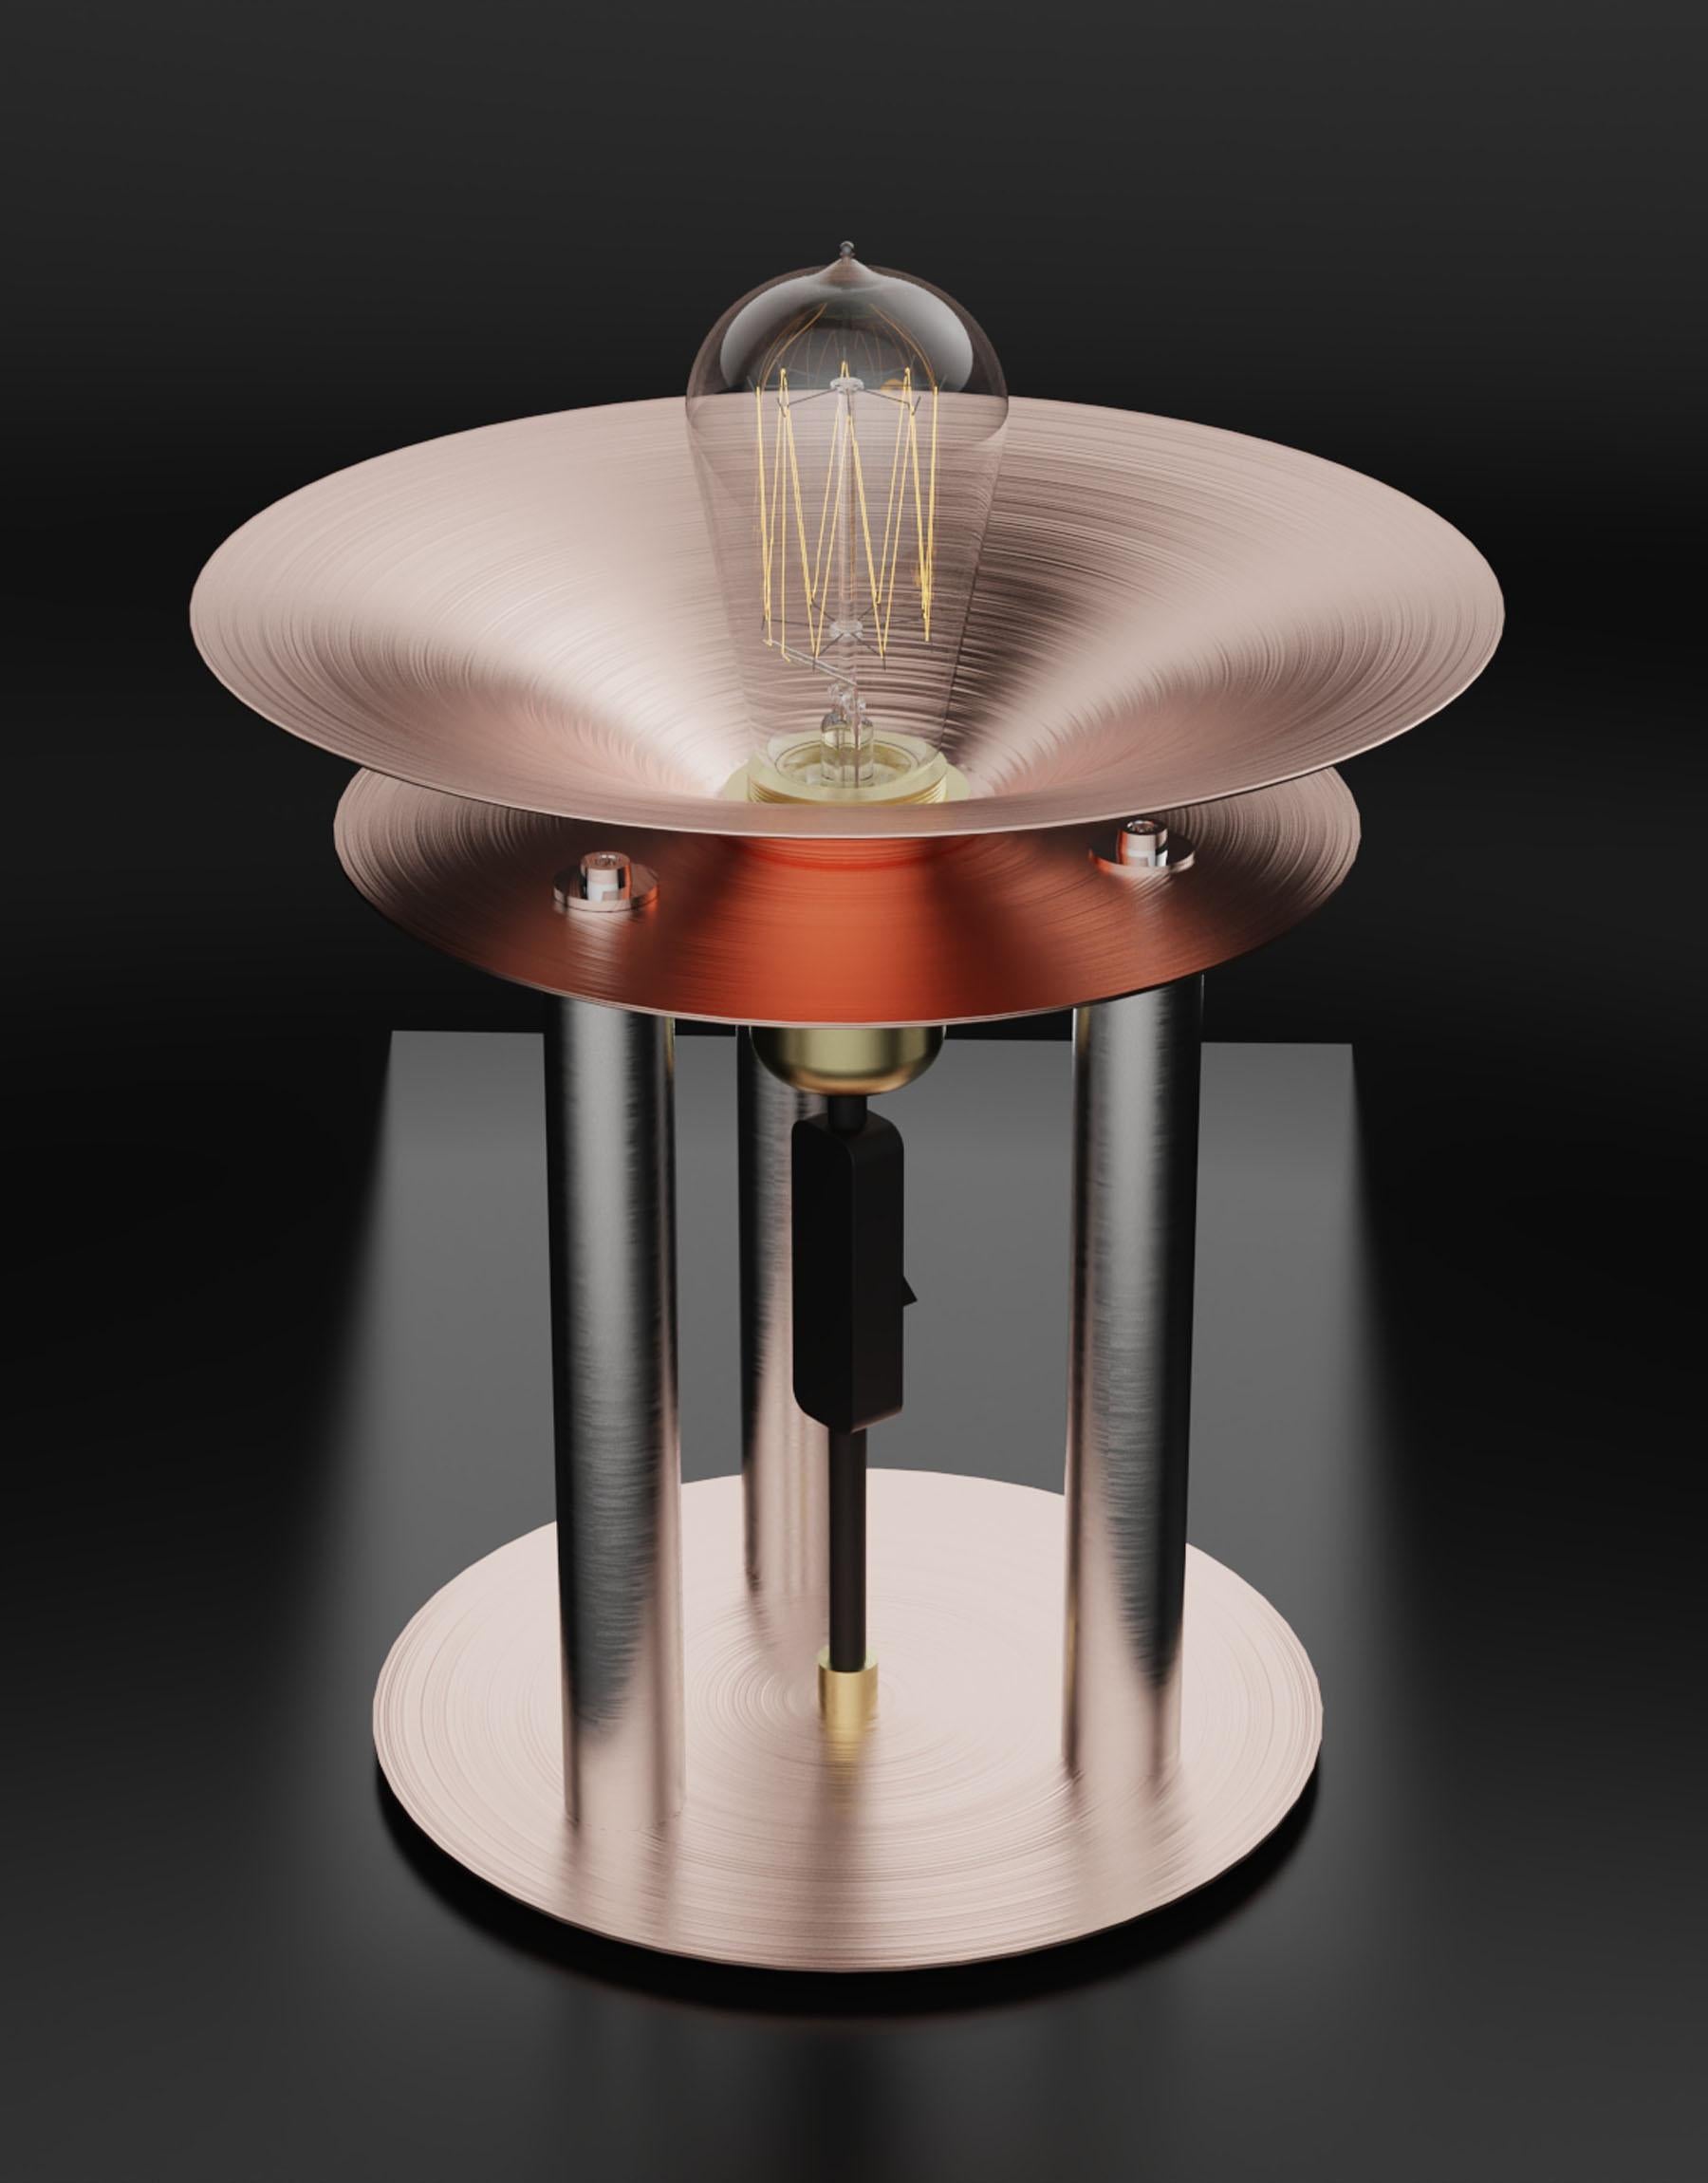 Add a touch of elegance and prestige to your interior with our industrial-style table lamp in genuine copper. This
unique lamp features two 200mm-diameter copper discs linked by three 304L stainless steel pillars, offering
unrivalled durability. The